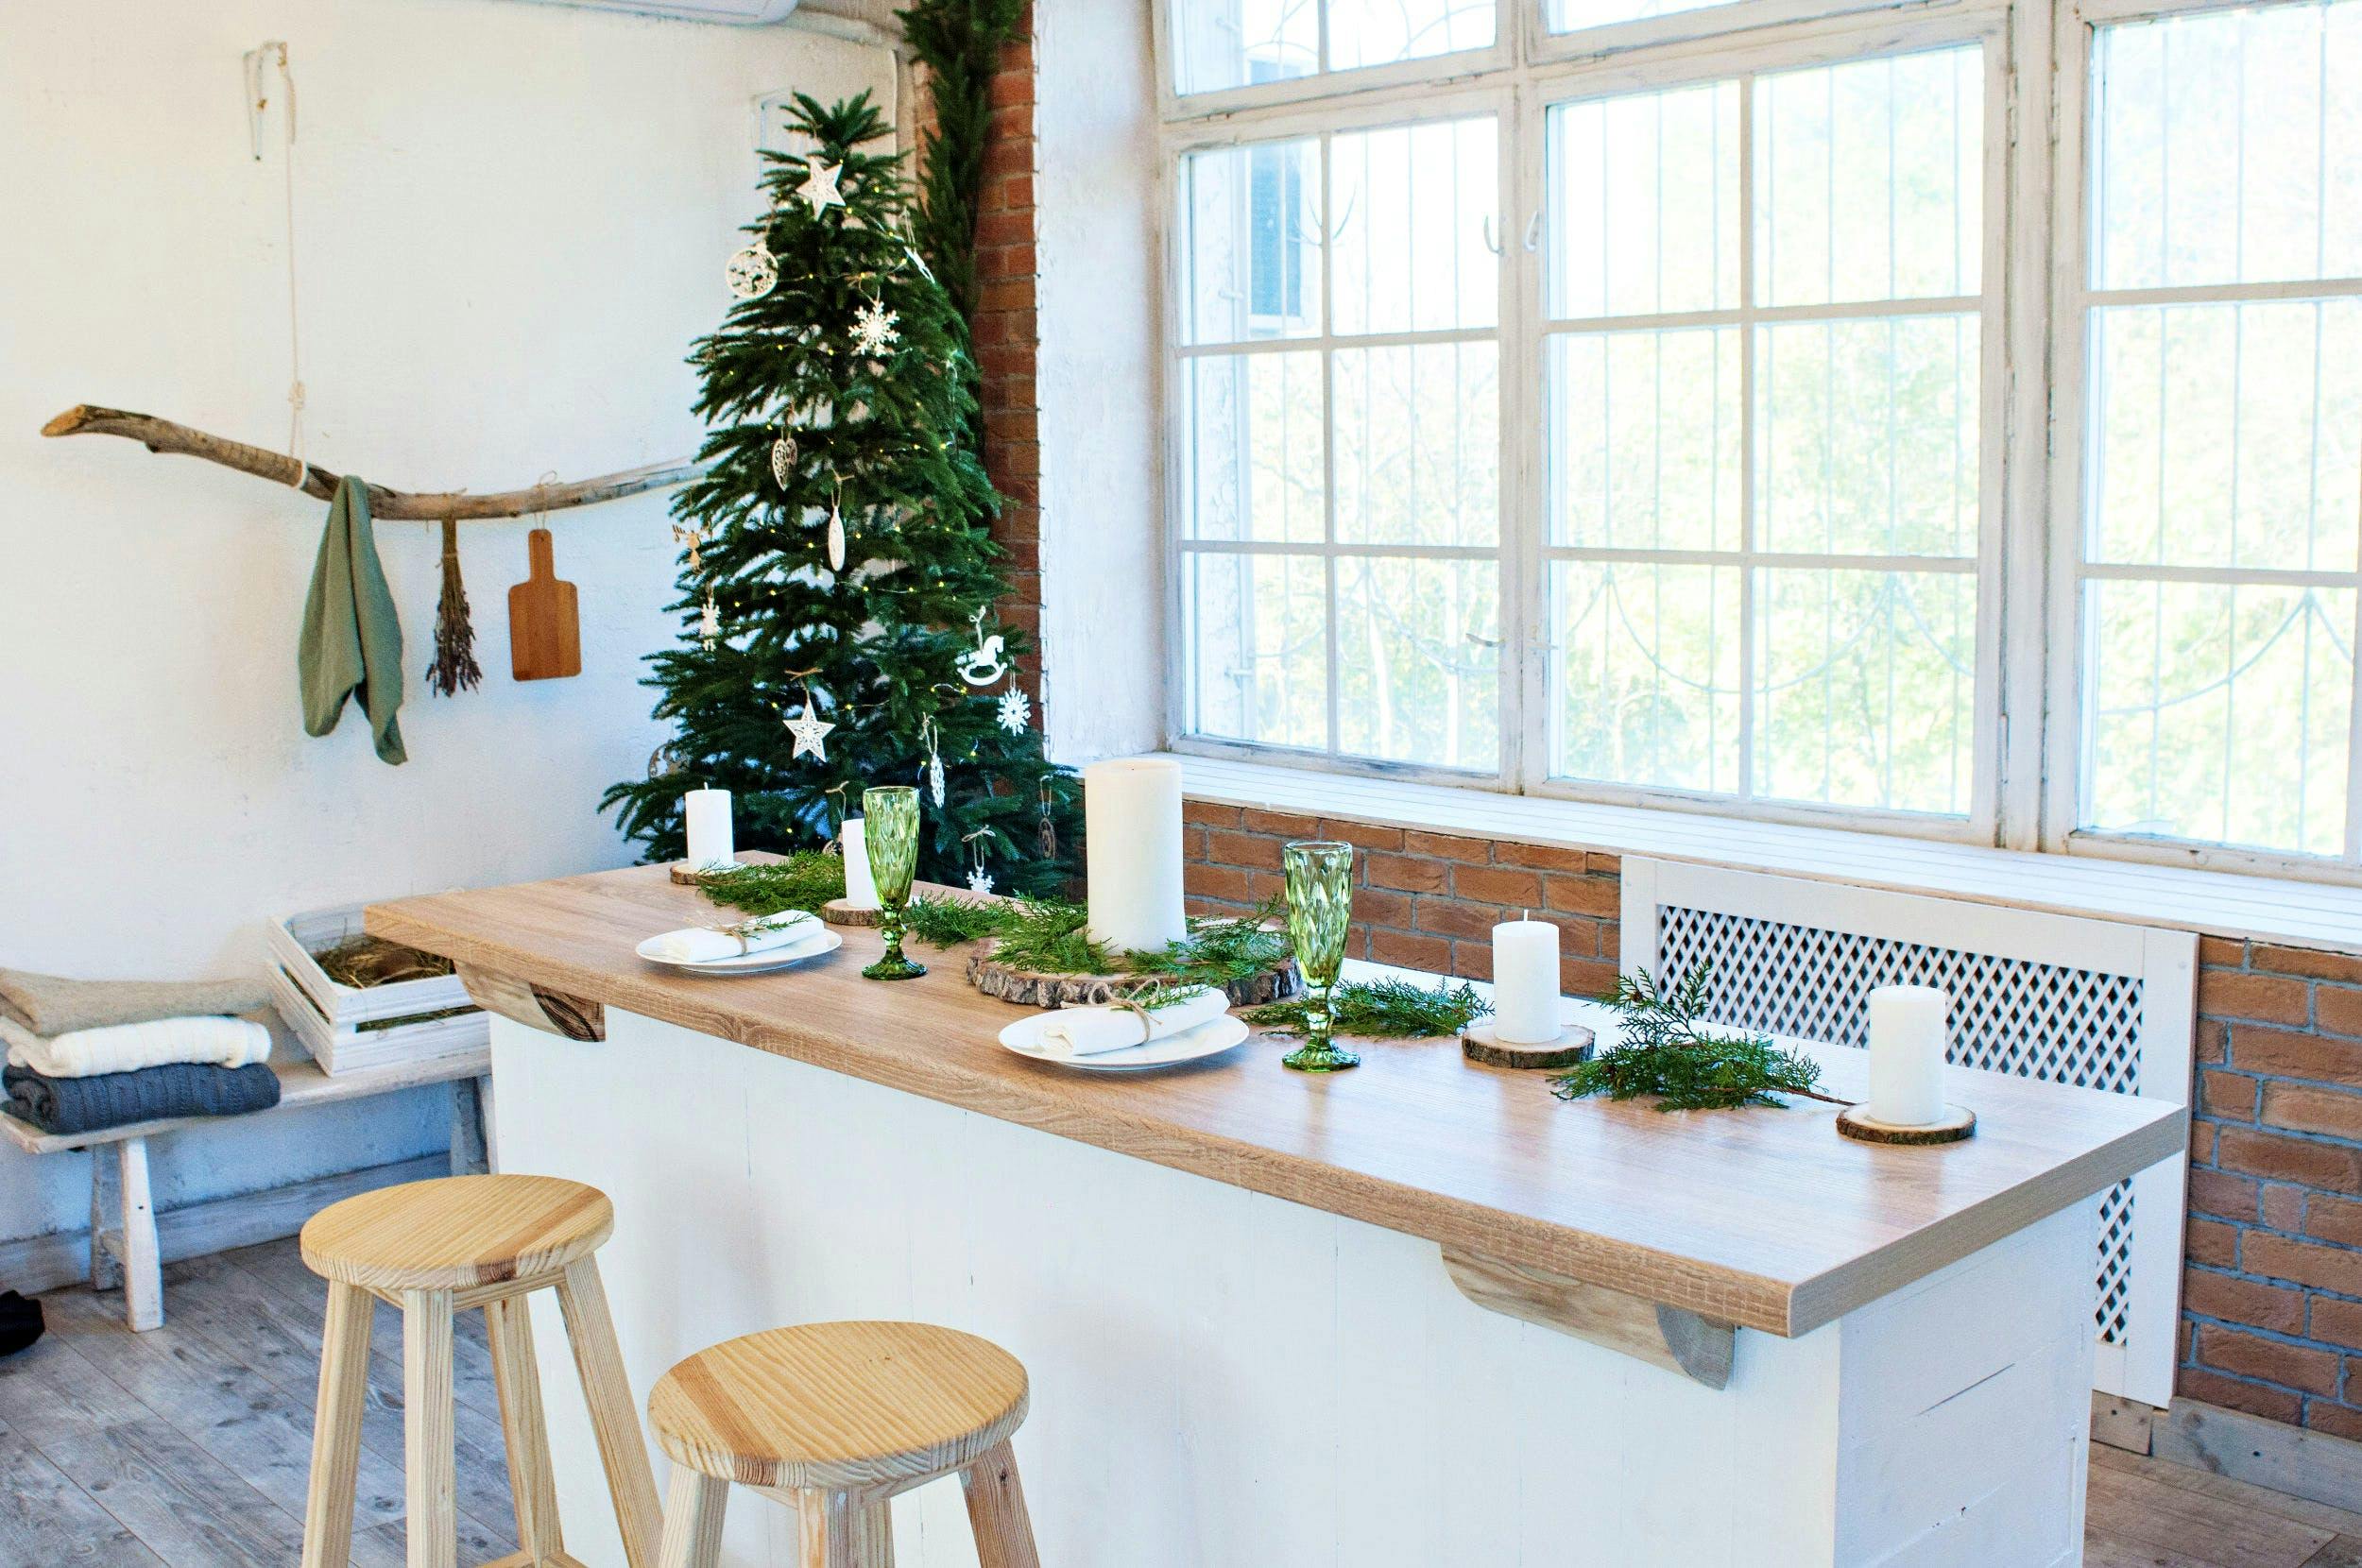 The most creative Christmas decoration ideas for your kitchen ...